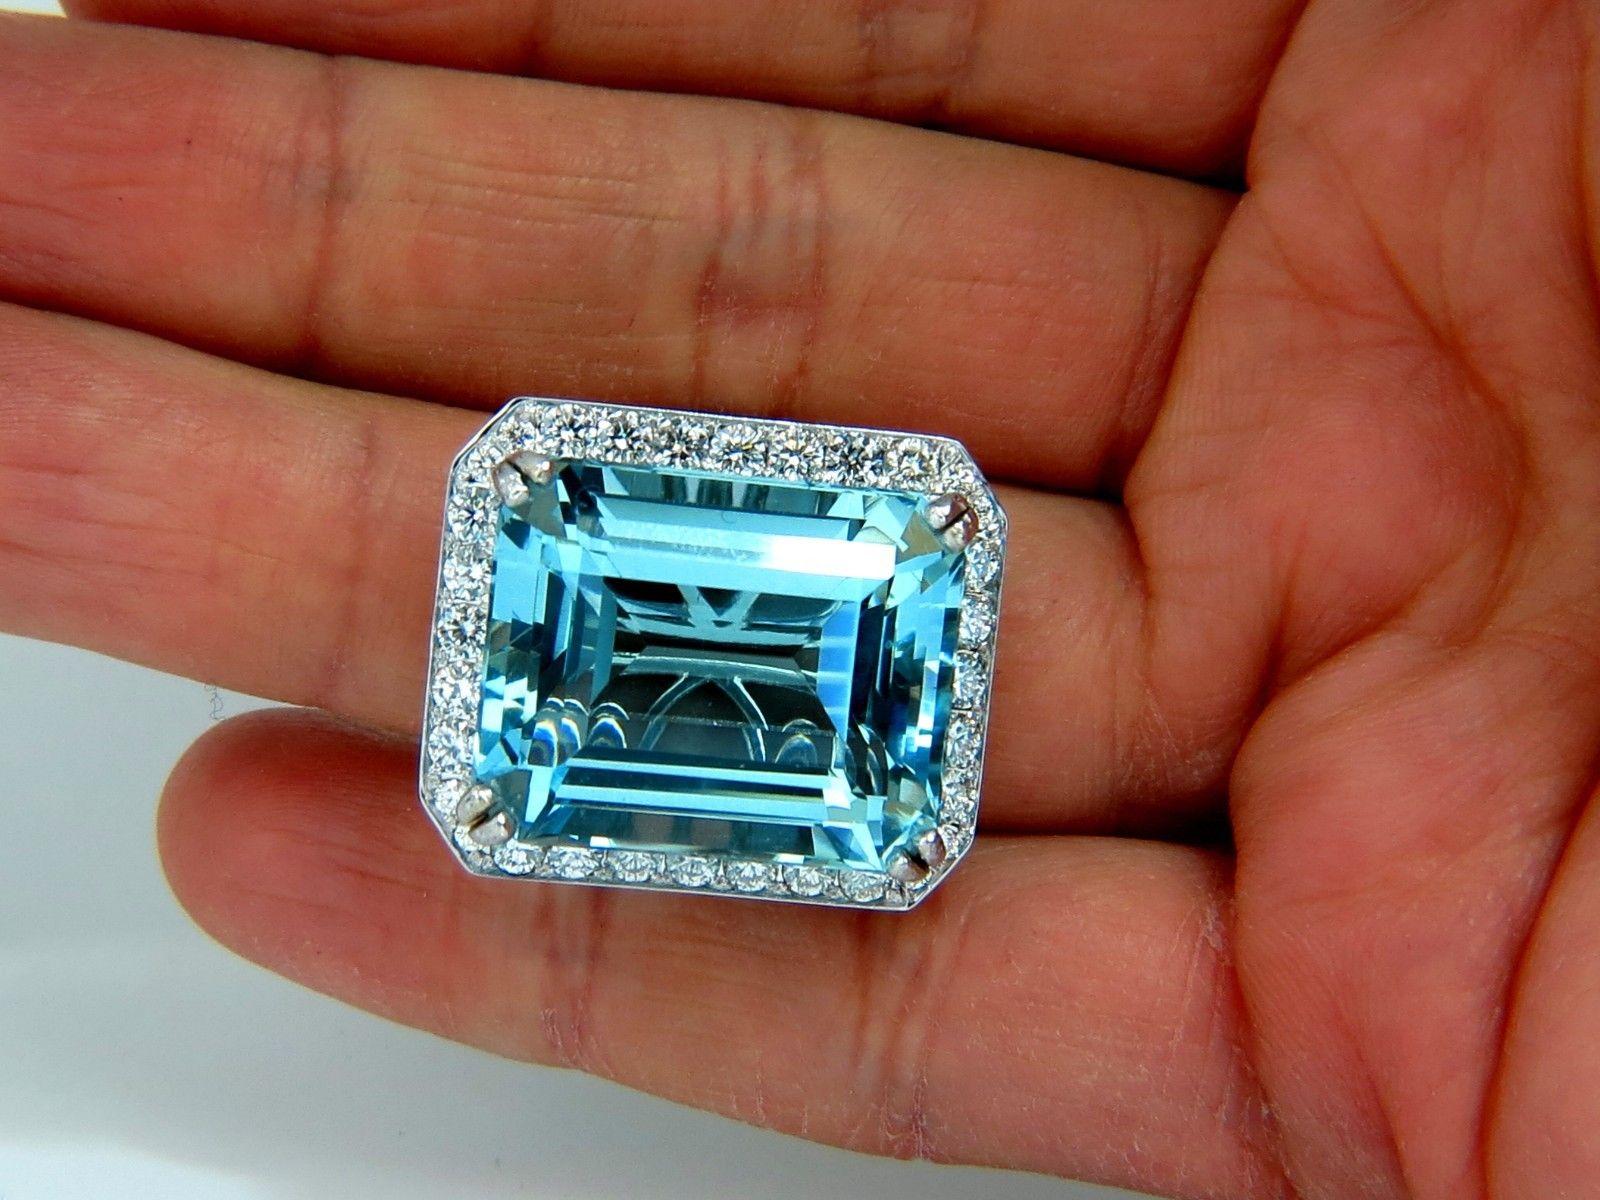 Avis Diamond Aquamarine Collections

GIA Certified 42.01ct. Natural Aquamarine Ring

 Excellent clean clarity

Octagonal Step cut (emerald cut).

Vivid Blue Aqua color.

Brilliant sparkles from all angles

Pristine Transparency

Report: